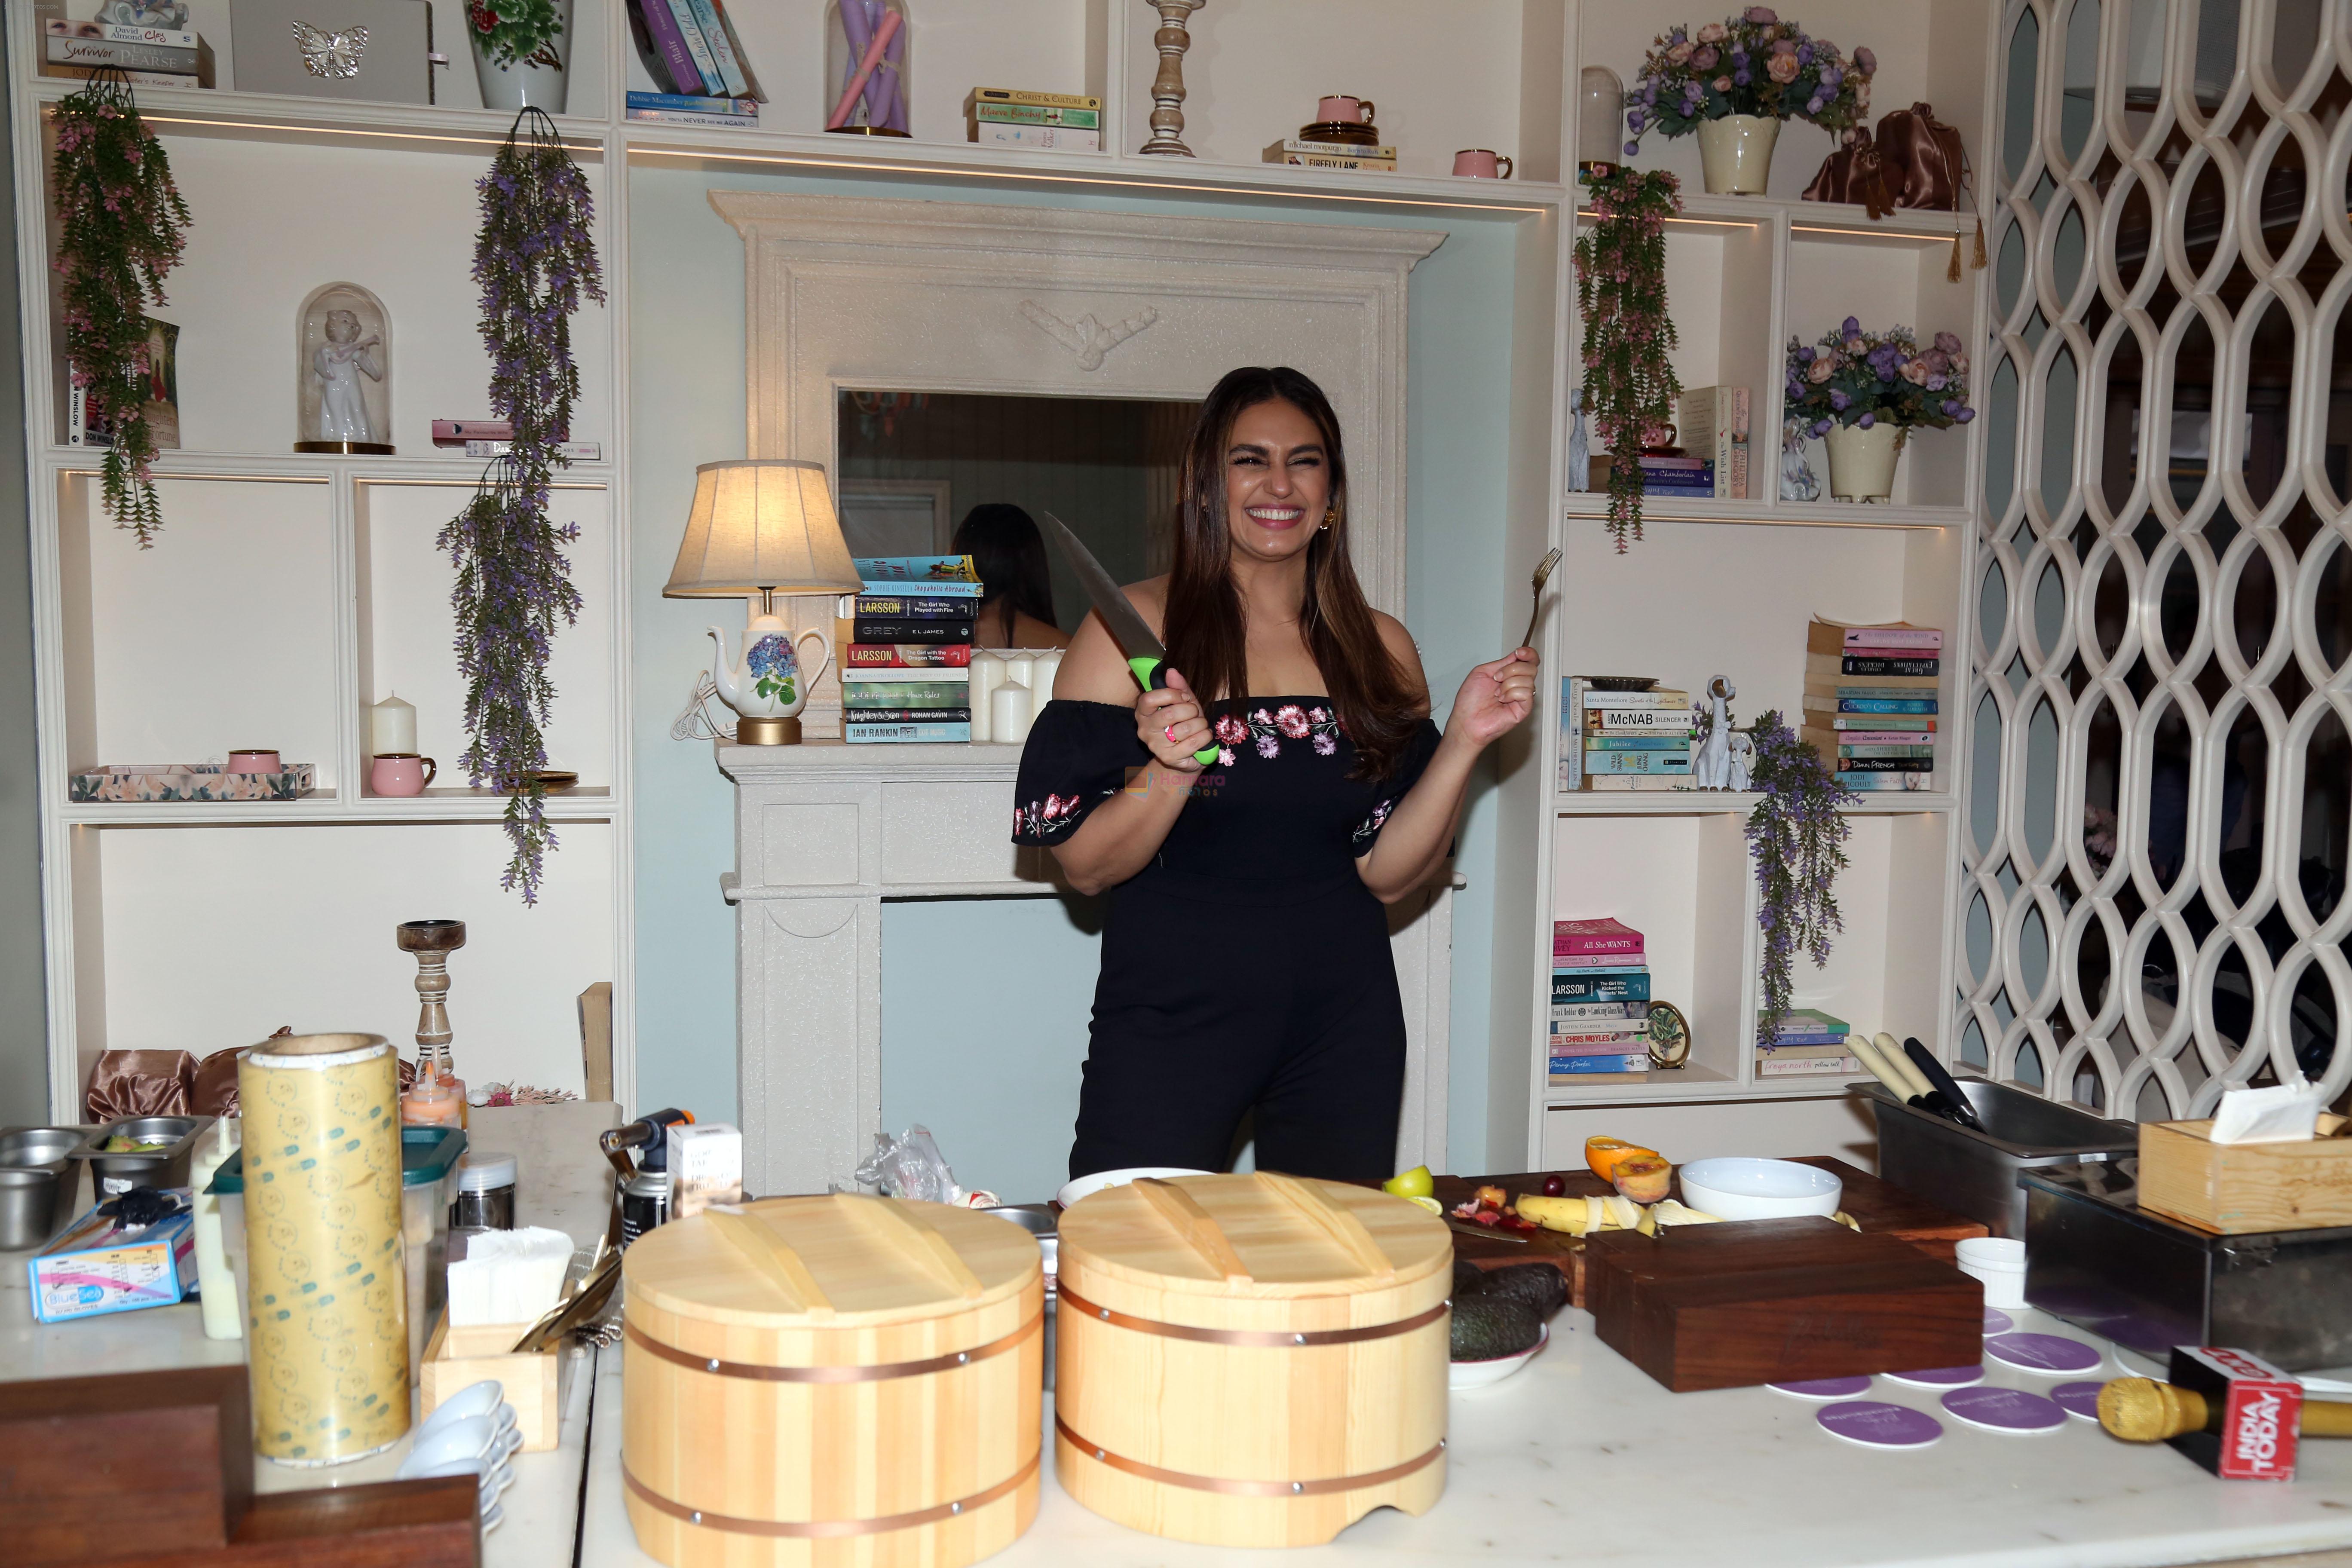 Huma Qureshi poses for camera promoting Fun Cooking Collaboration with Gary Mehigan on 5 July 2023